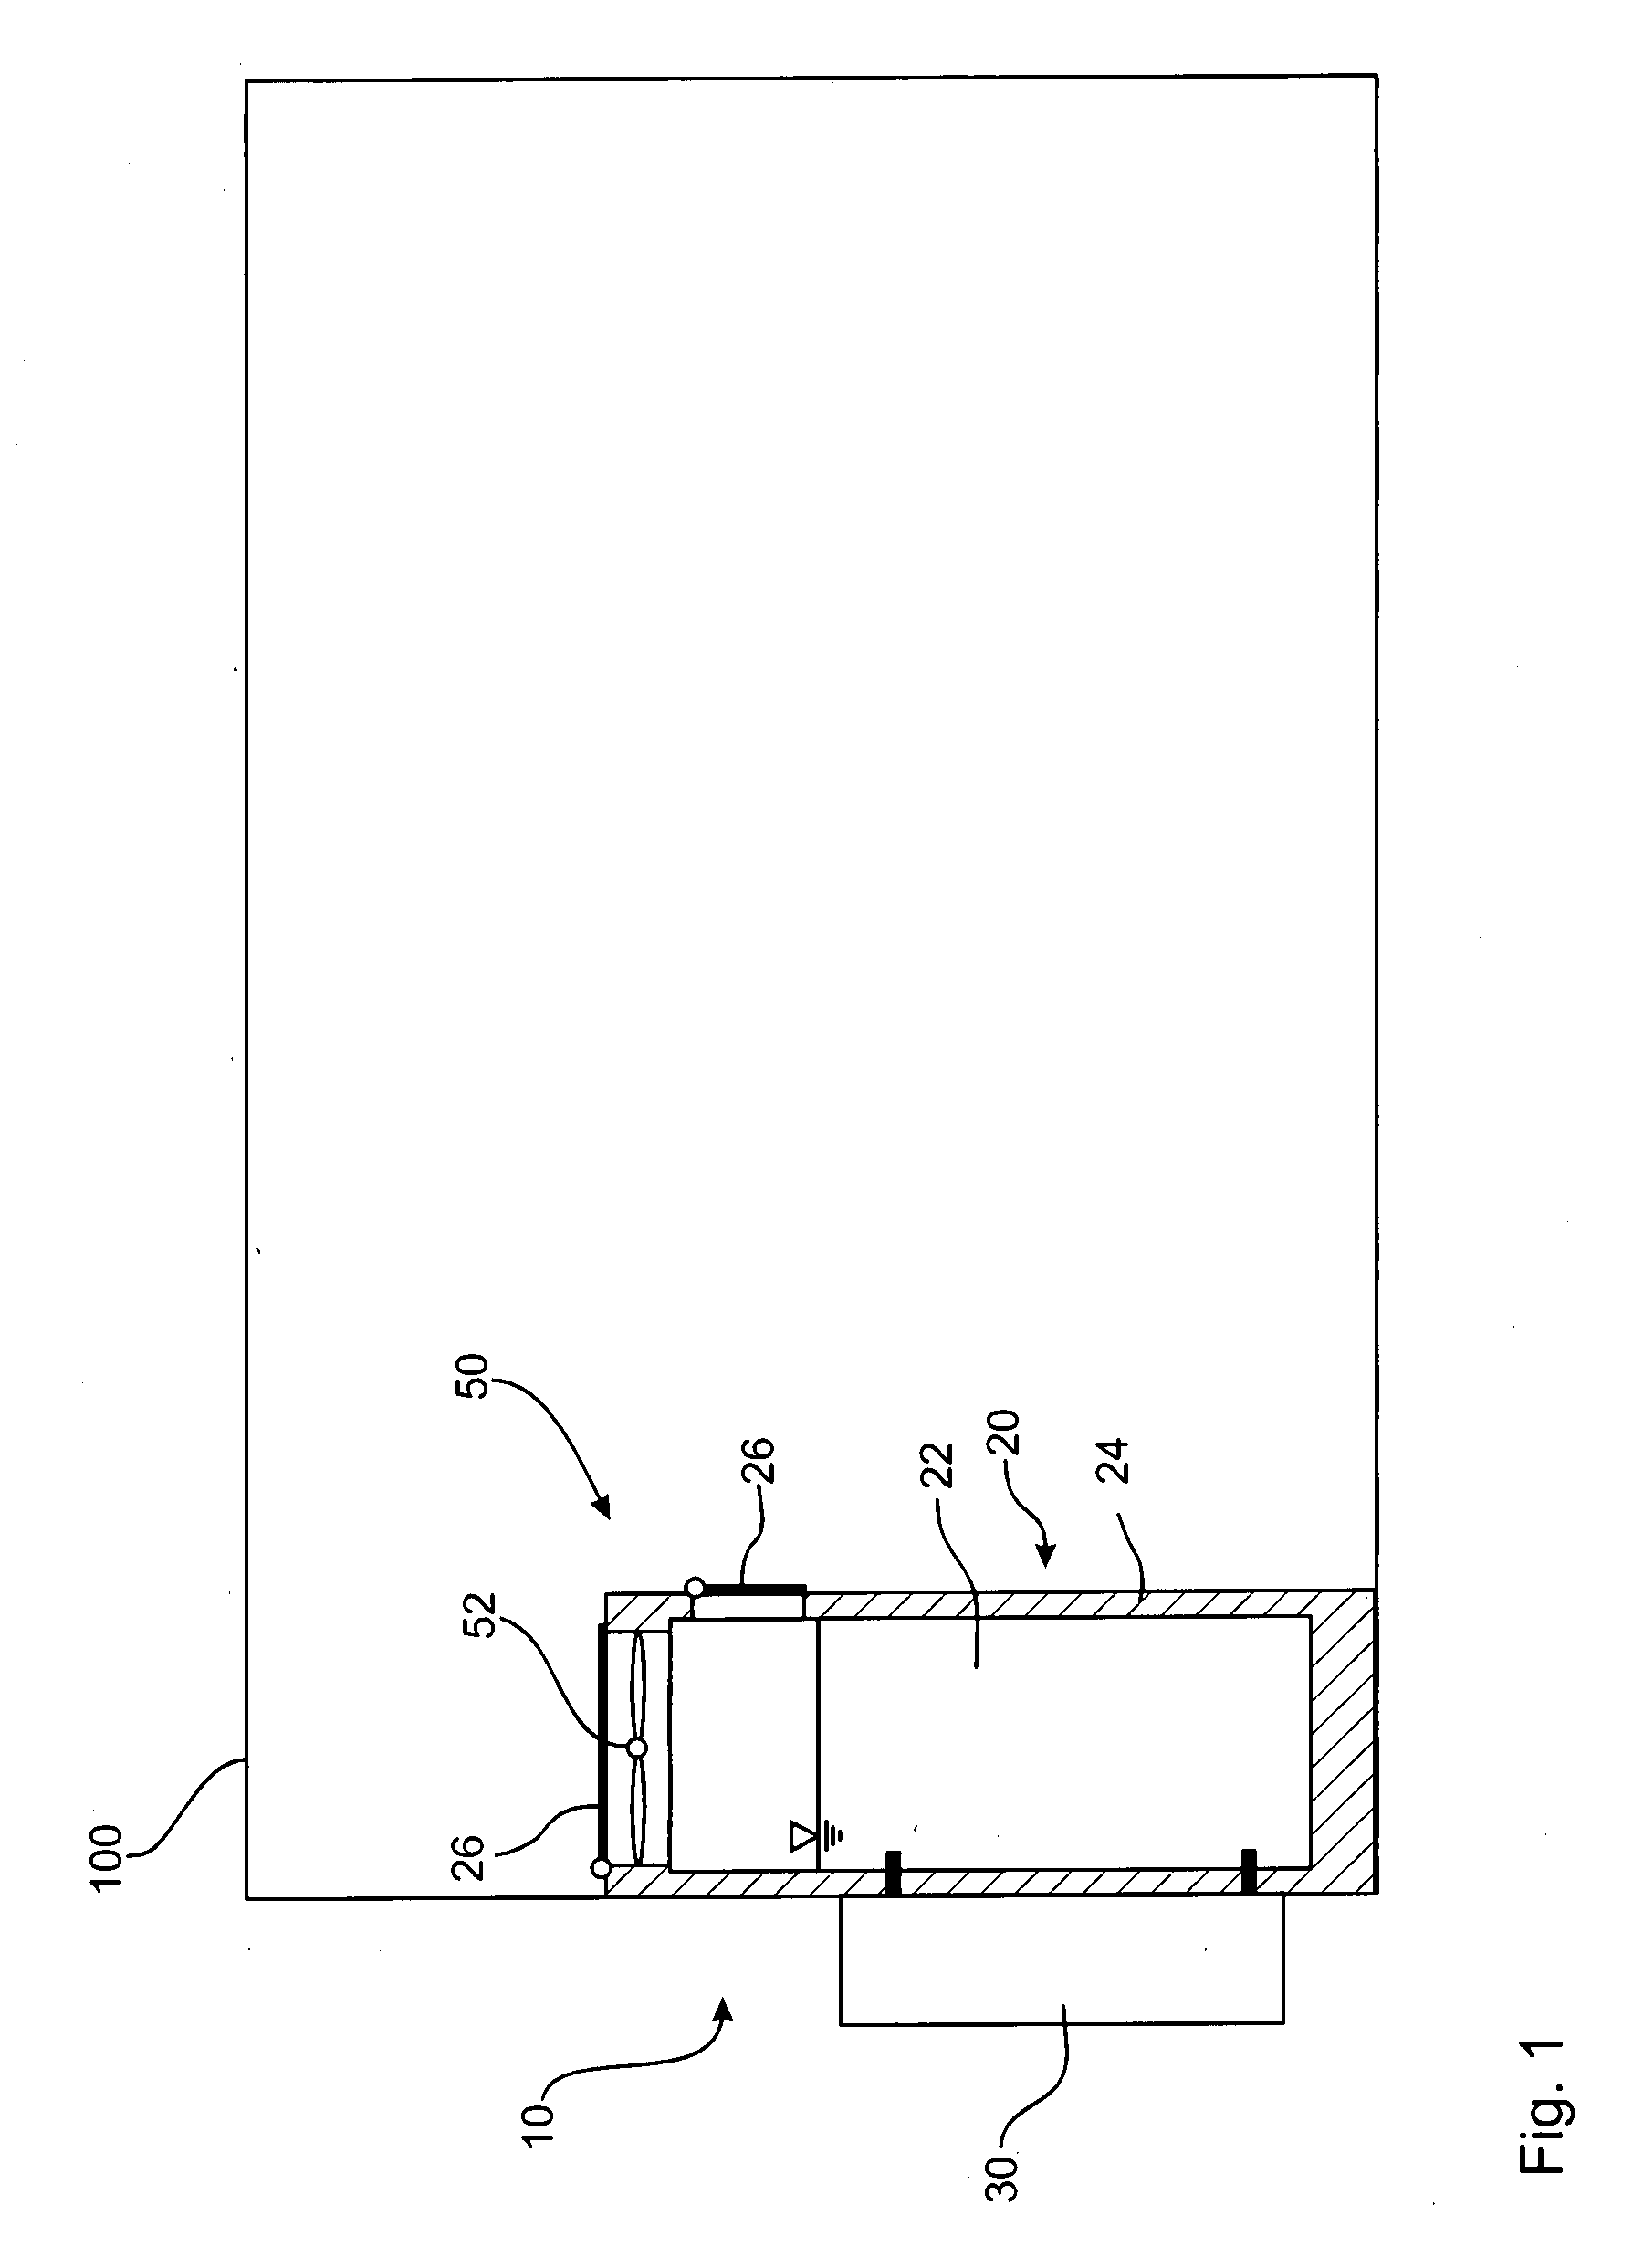 Method for cooling a refuge chamber in an emergency situation